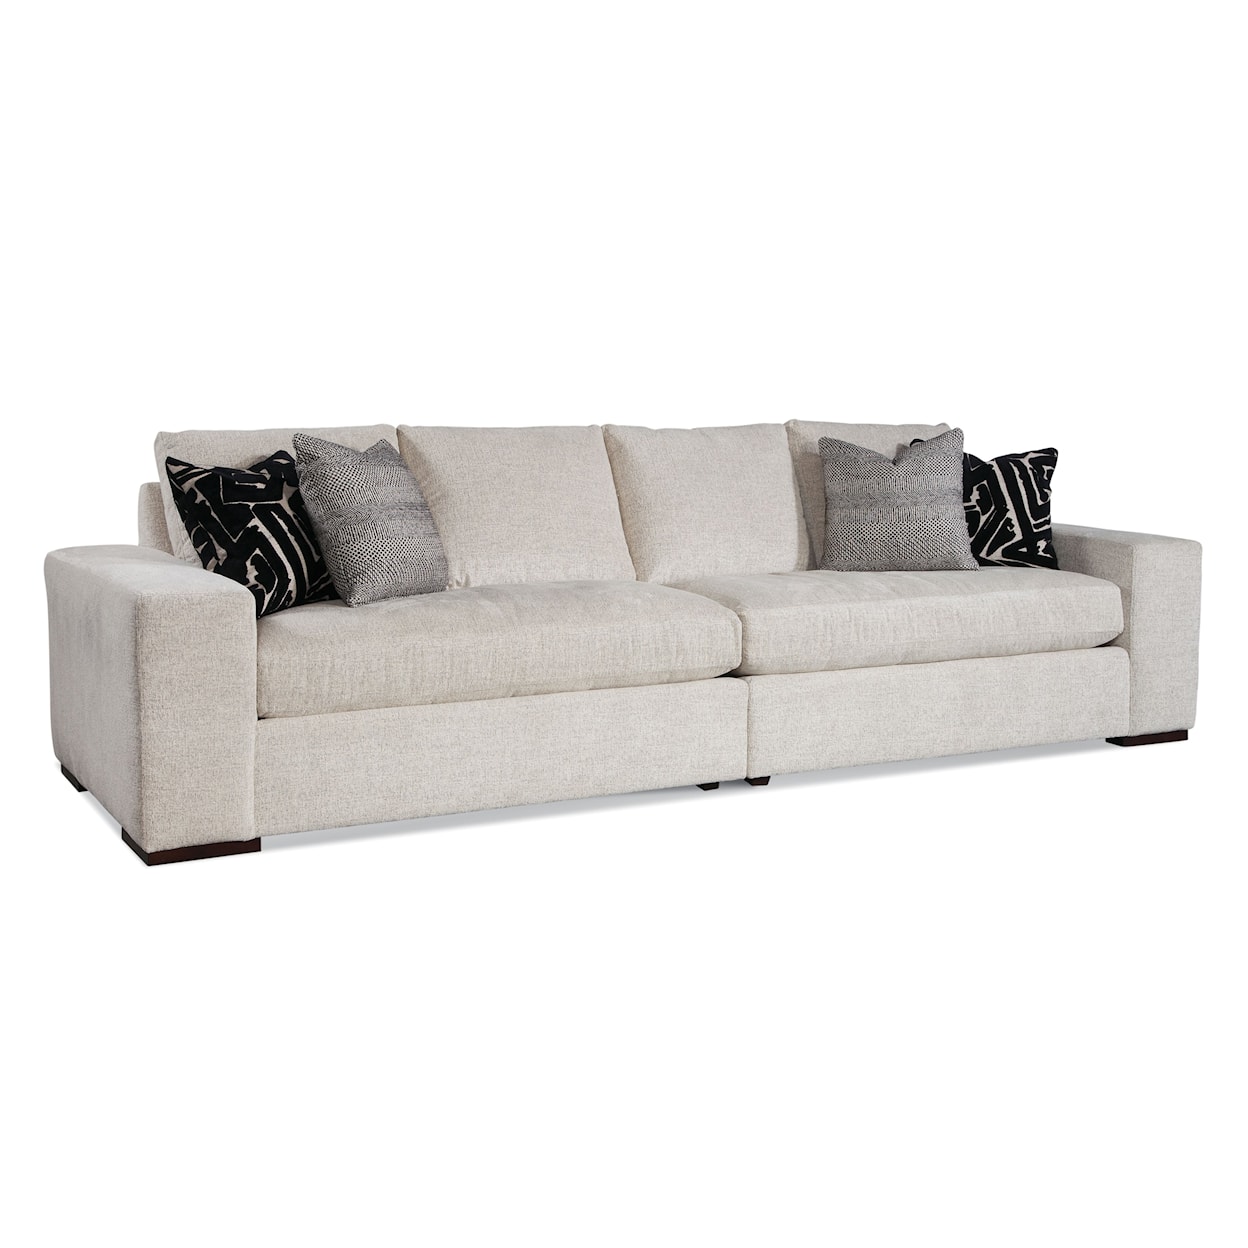 Braxton Culler Memphis Two Piece Bench Seat Sofa Sectional